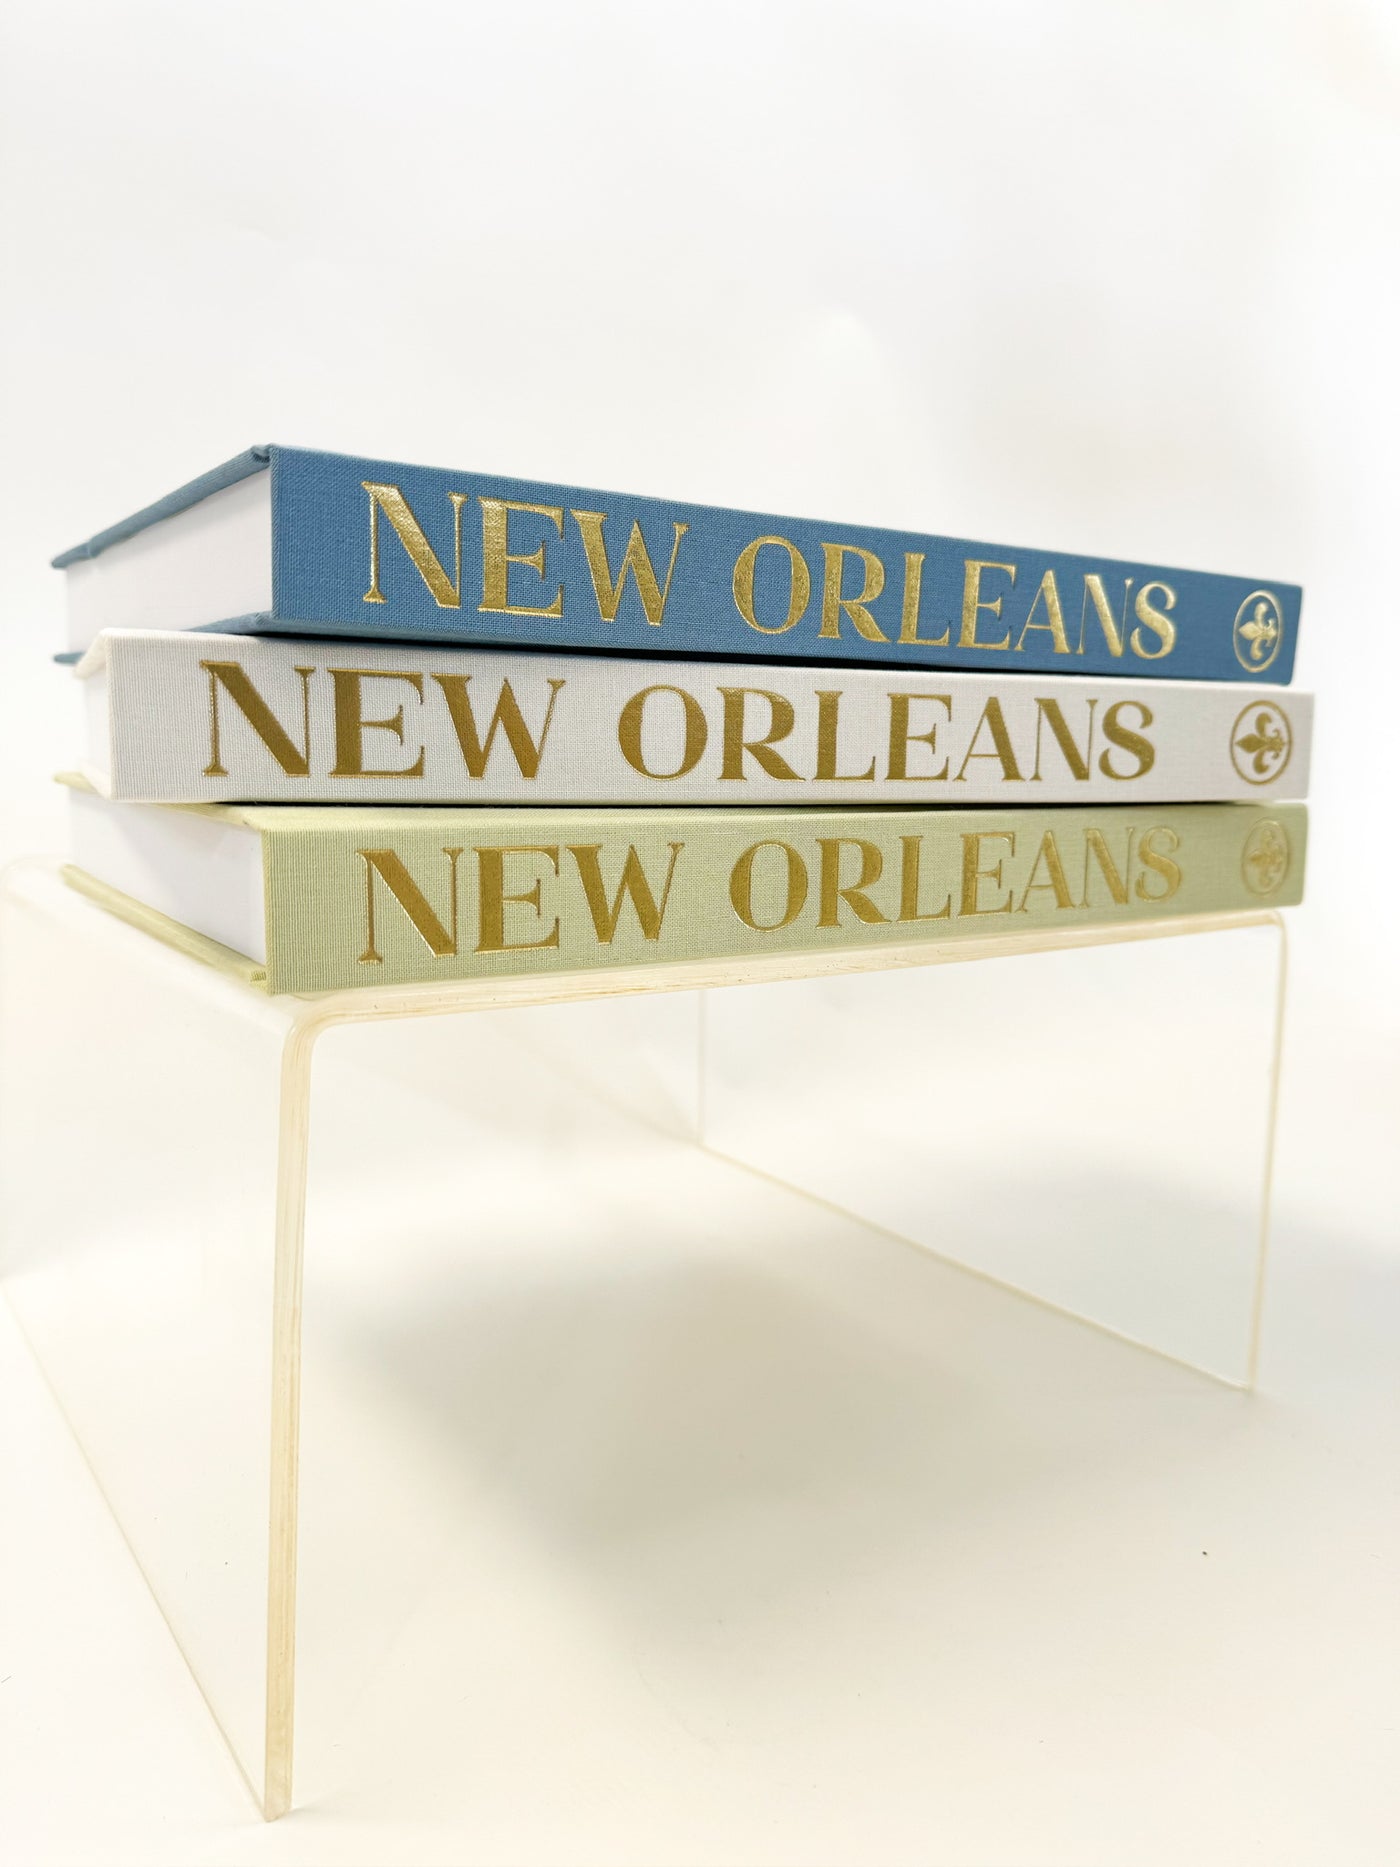 New Orleans Coffee Table Book